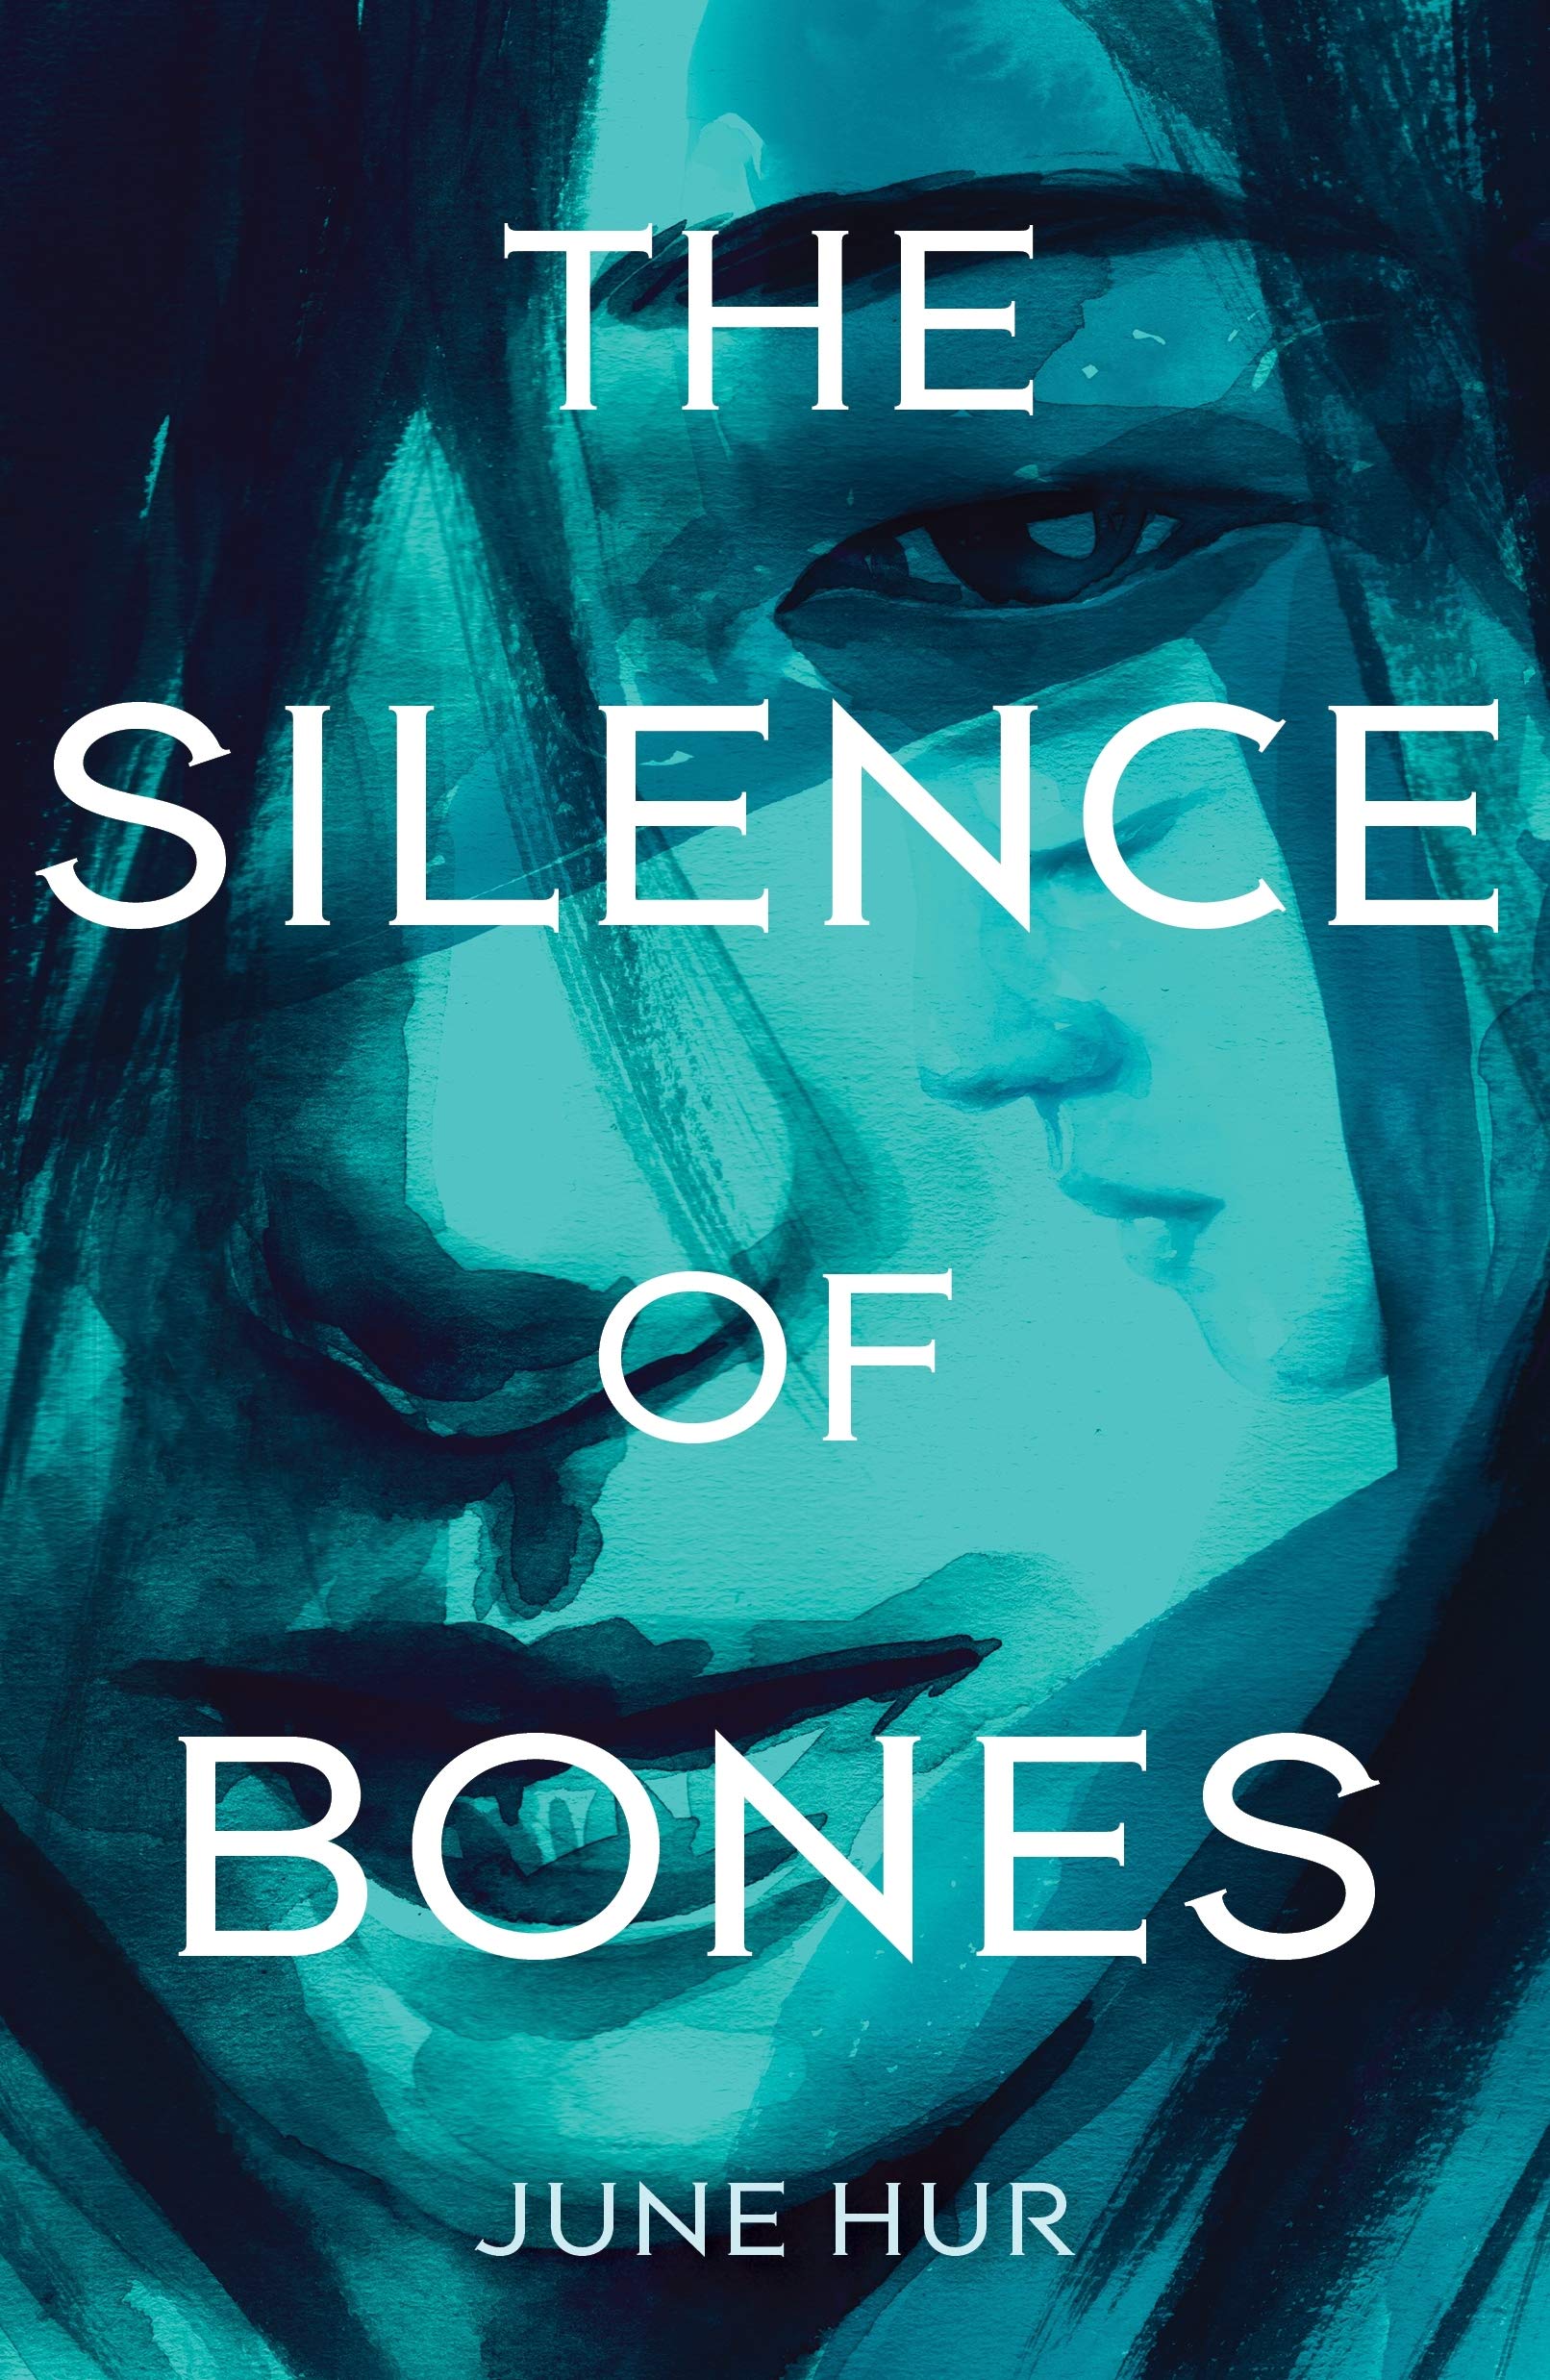 Image for "The Silence of Bones"